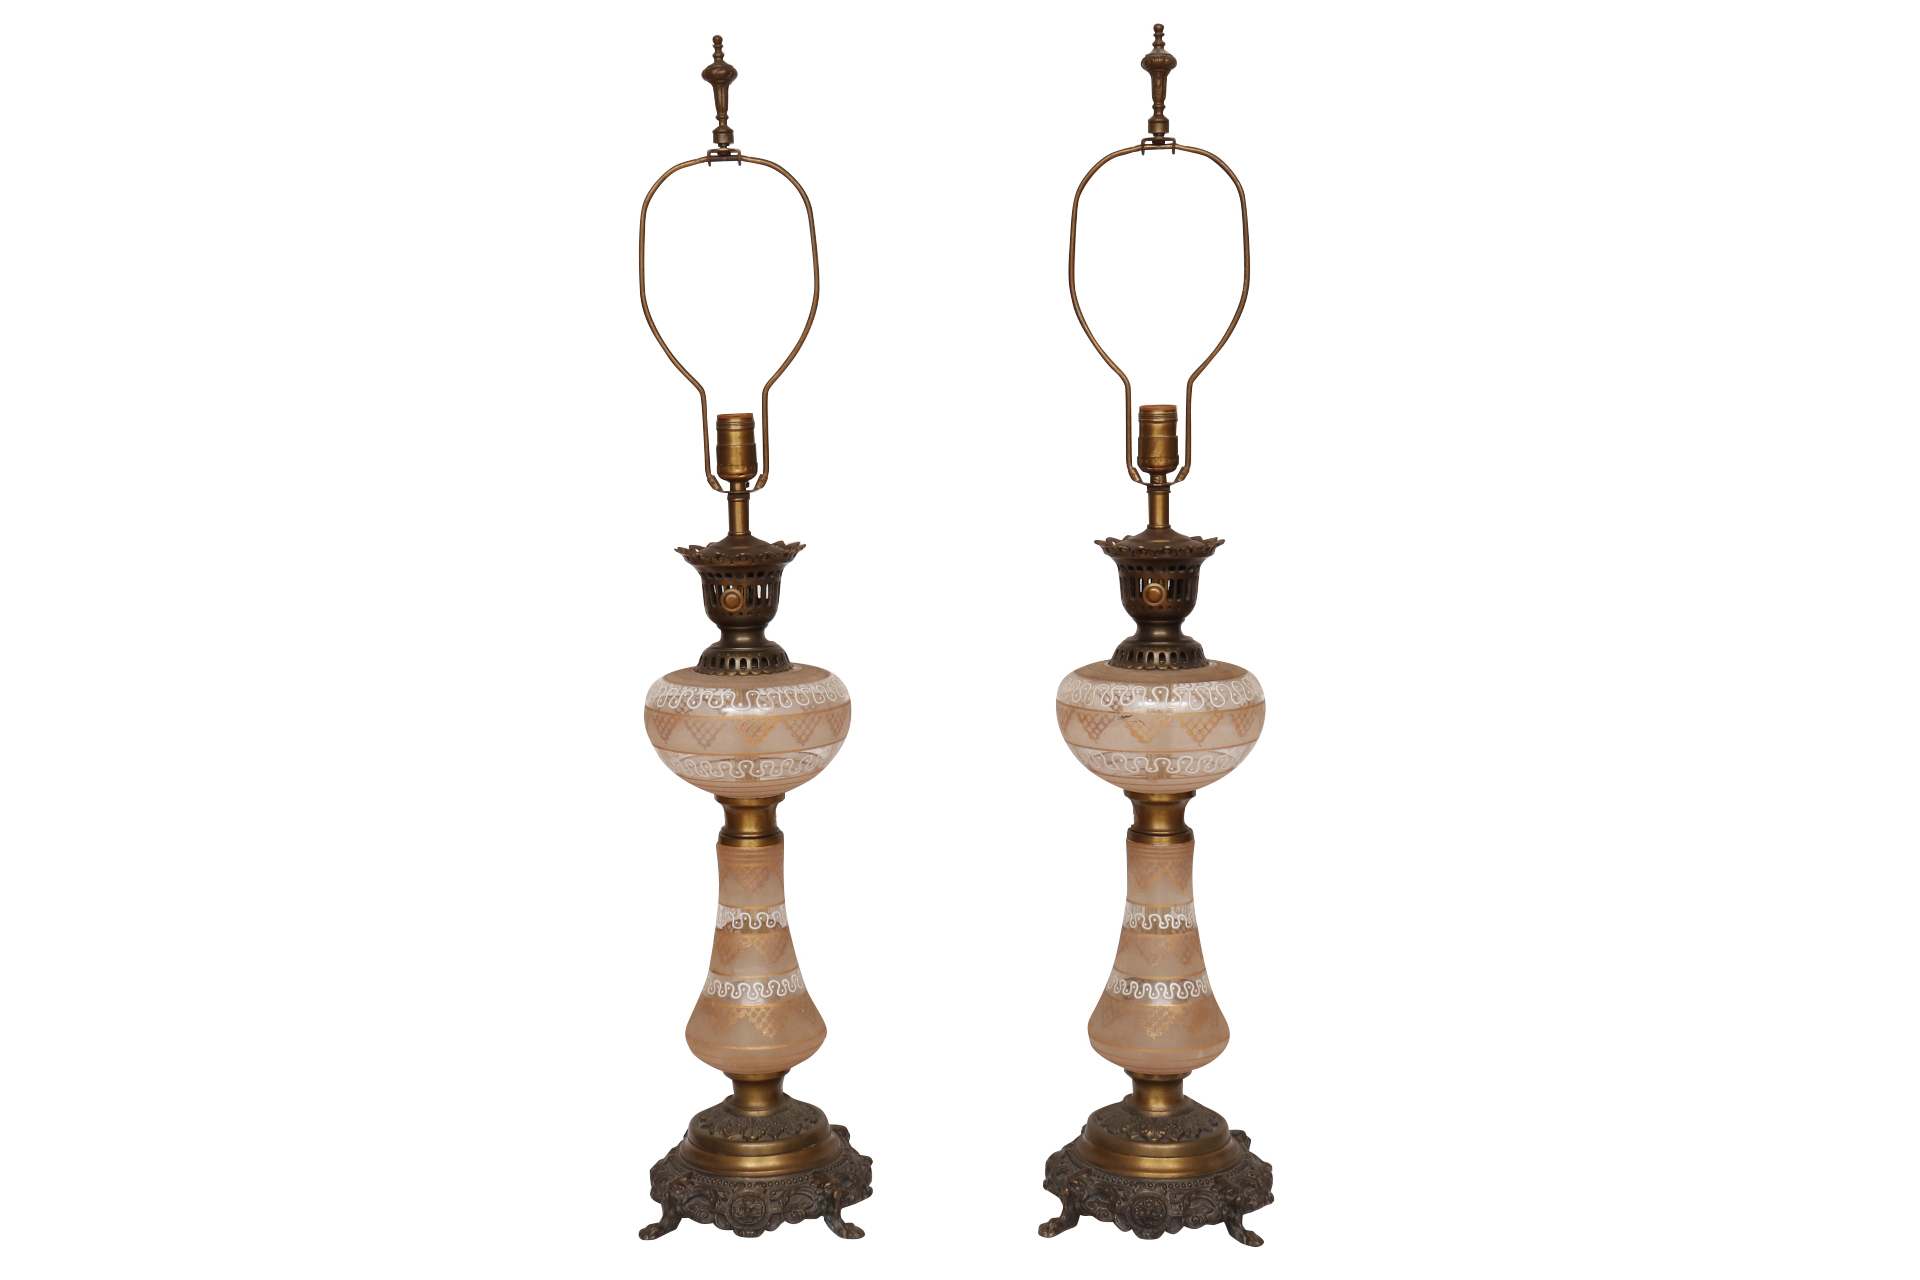 Regency Glass Table Lamps - a Pair~P77627301